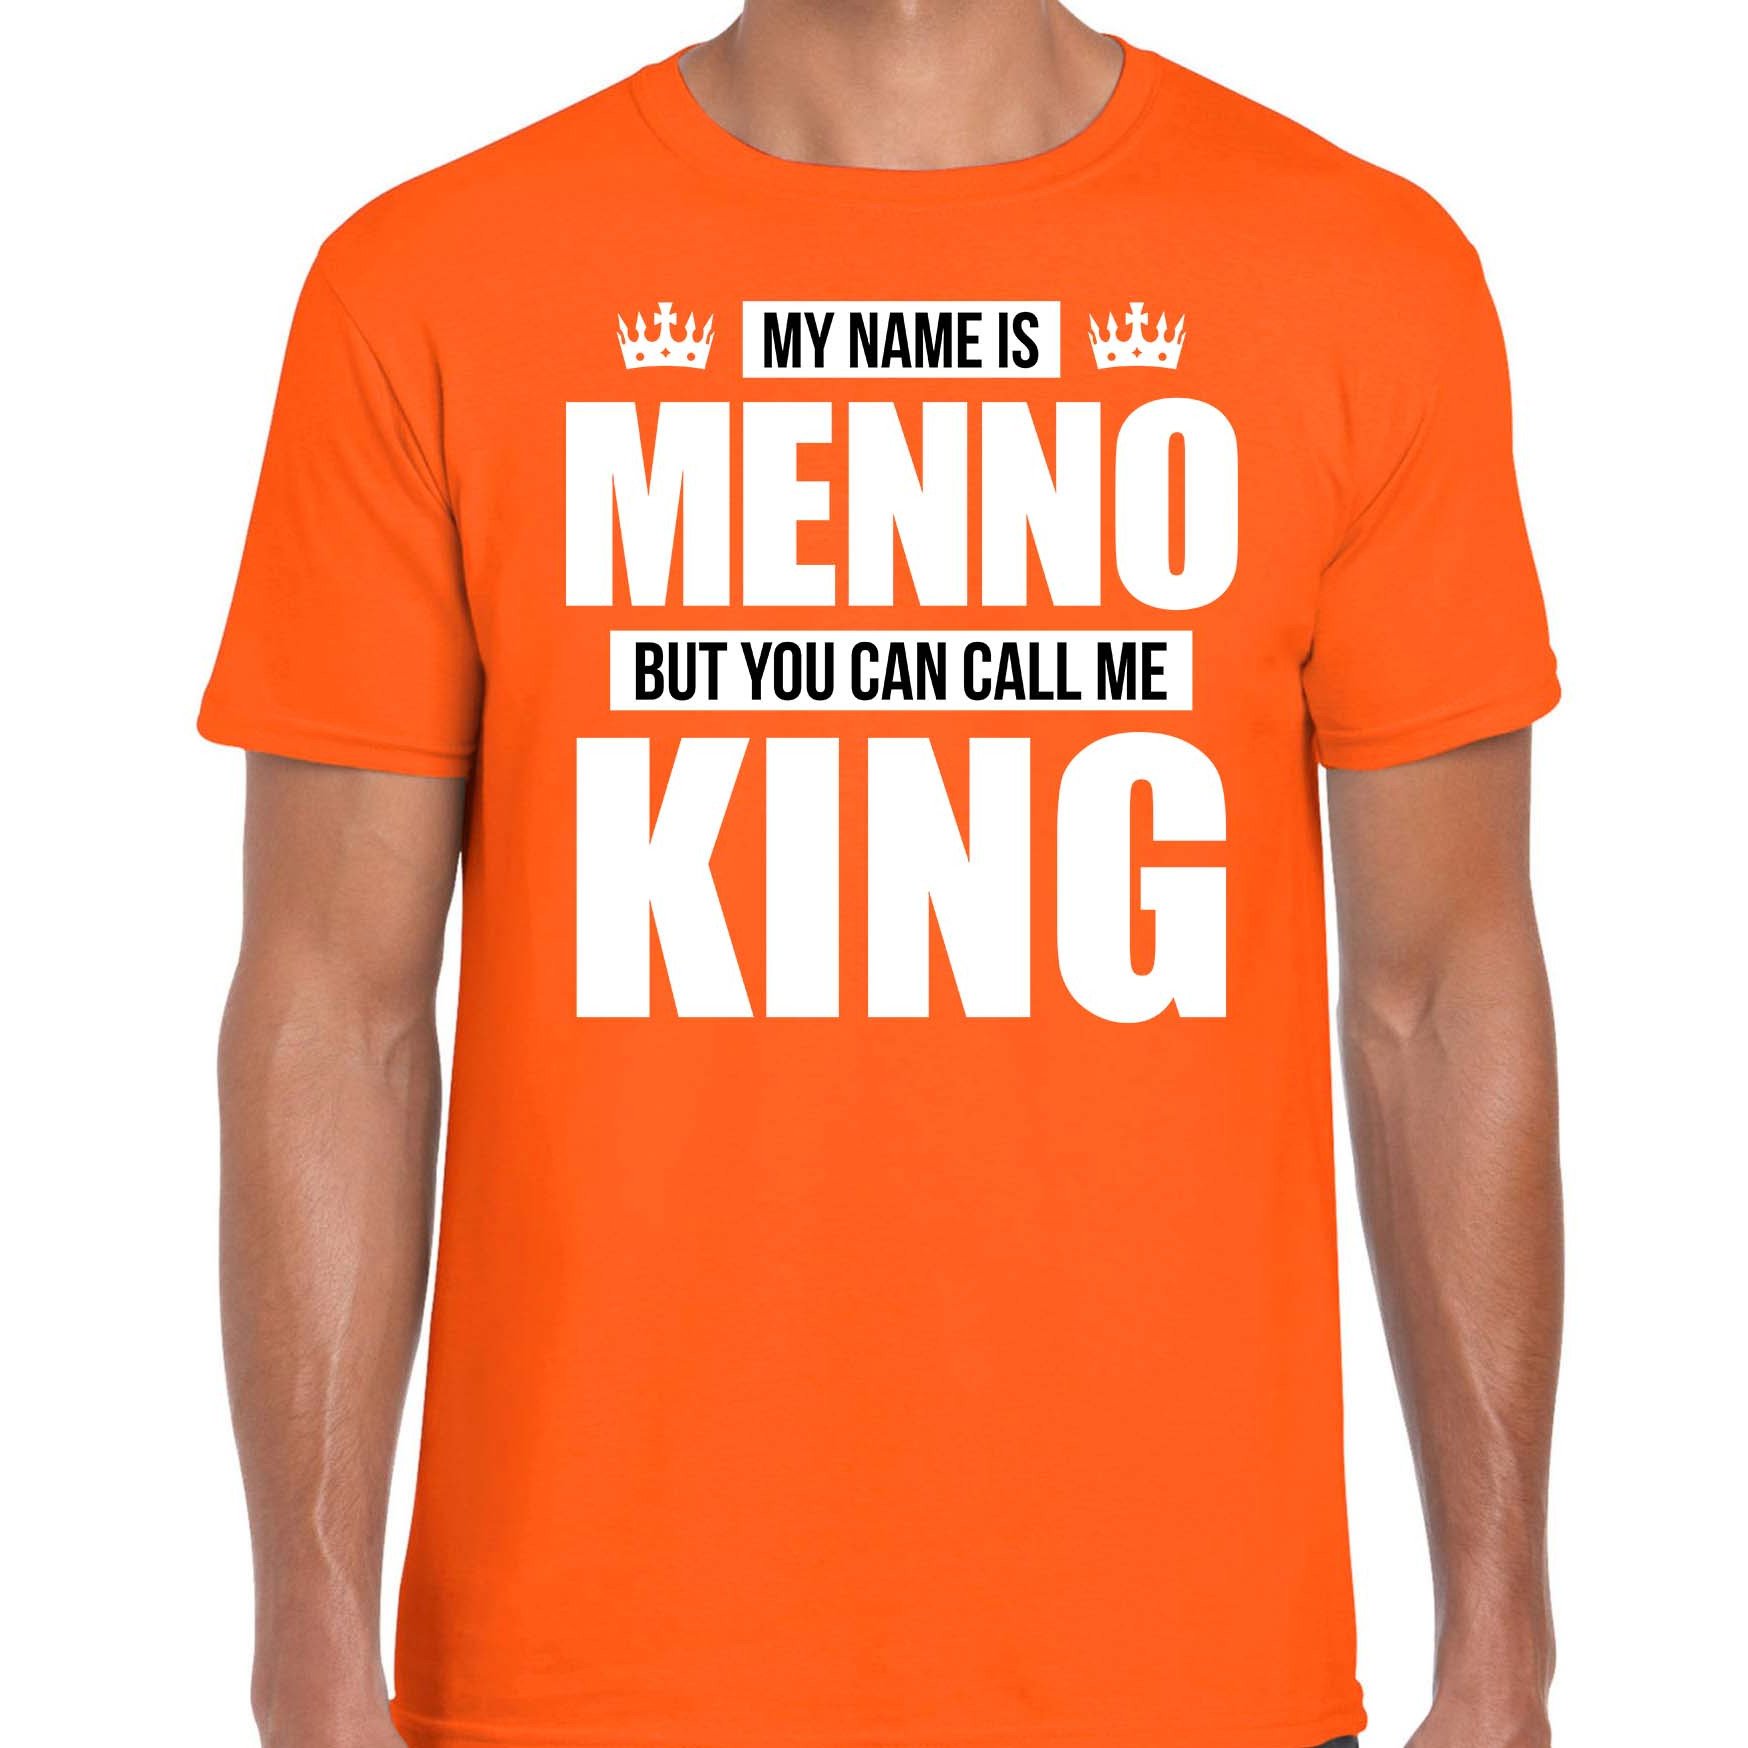 Naam cadeau t-shirt my name is Menno but you can call me King oranje voor heren